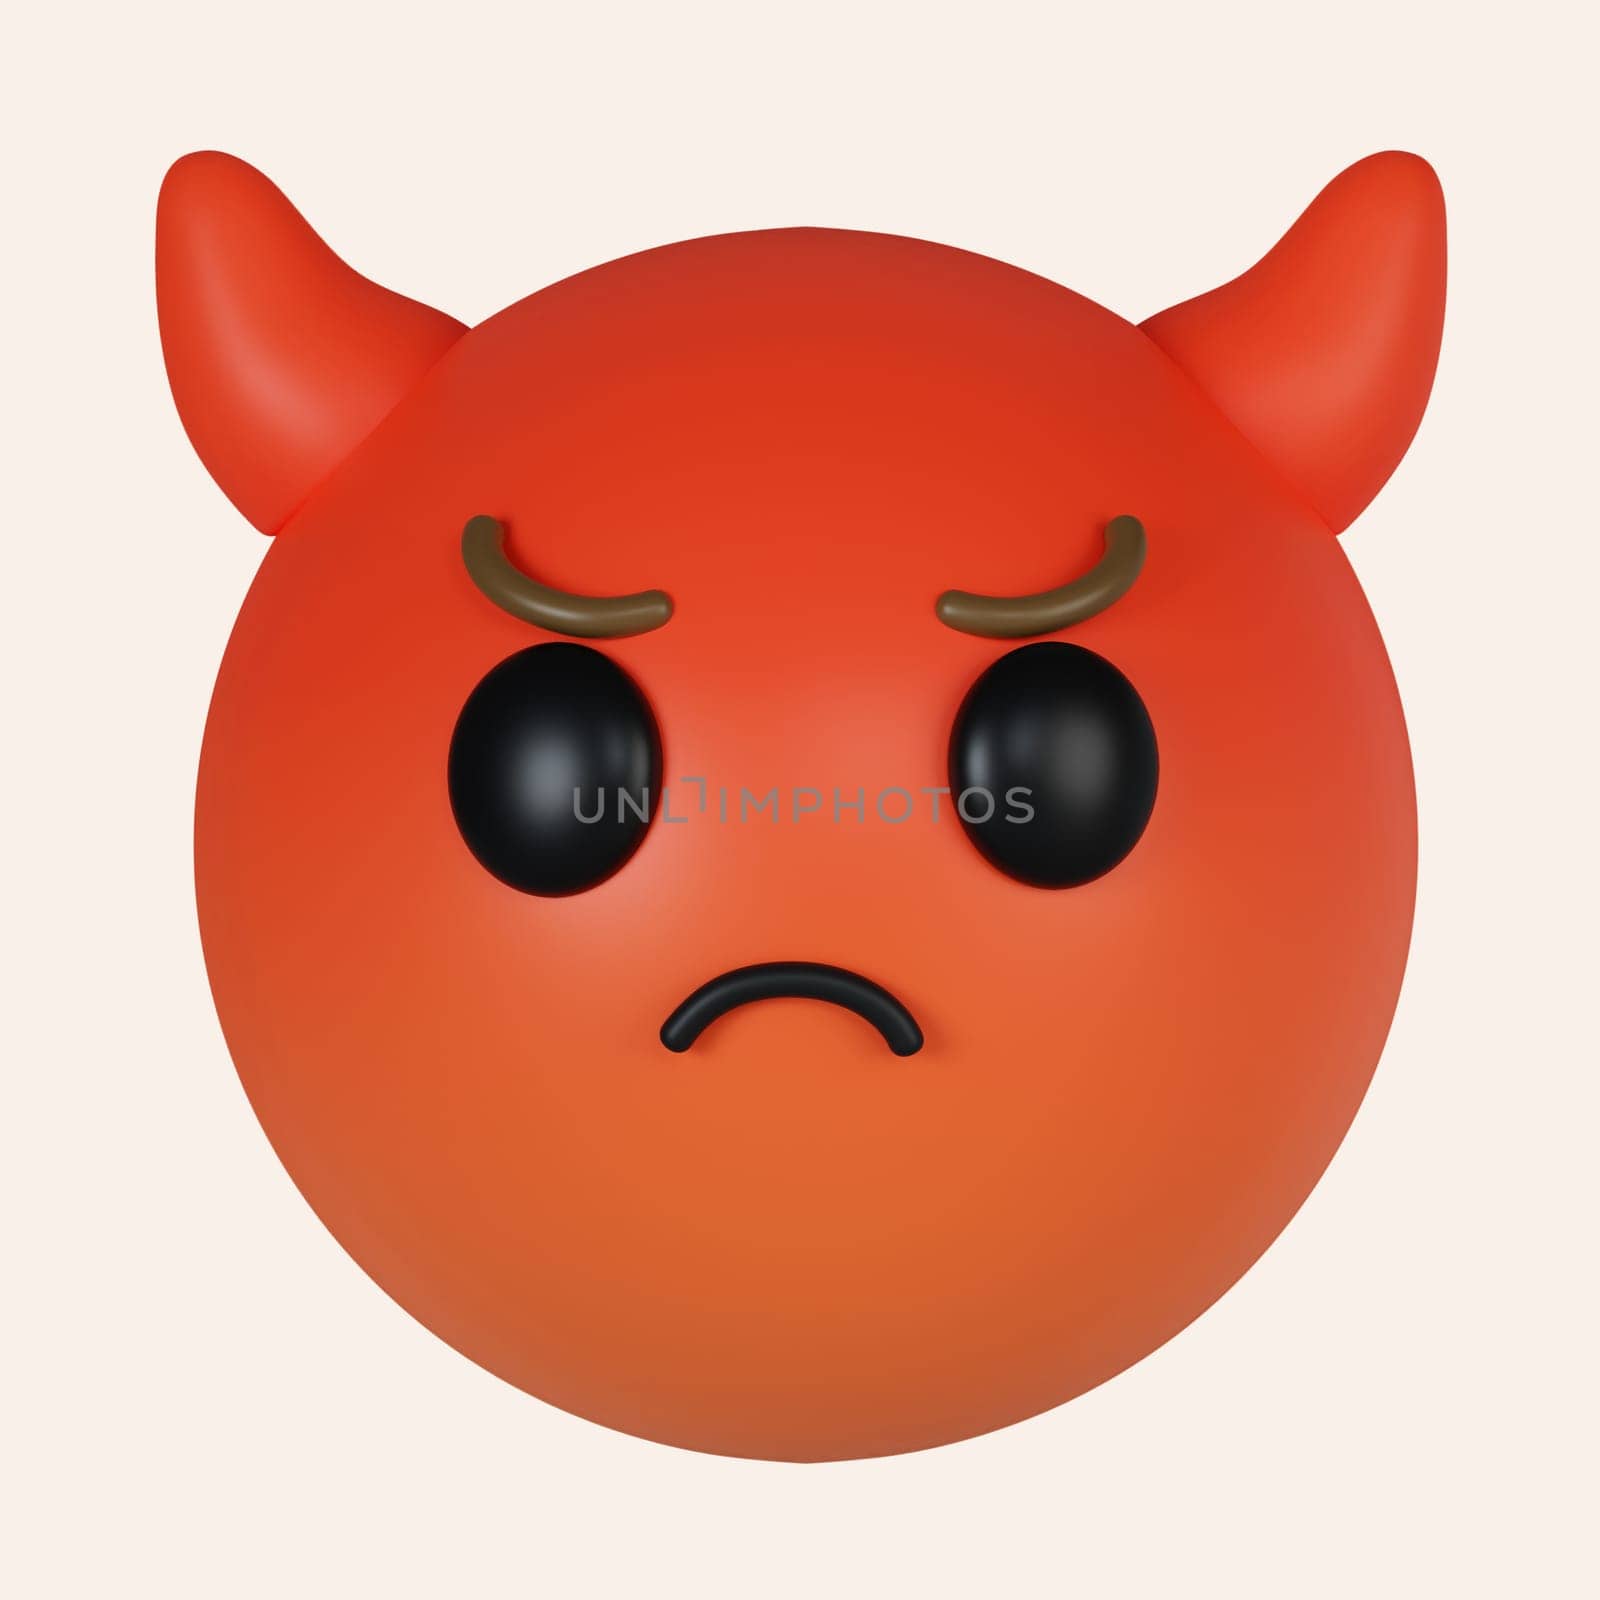 3d emoticon smiling with horns, devil emoji. Red face devil emoji. icon isolated on gray background. 3d rendering illustration. Clipping path..